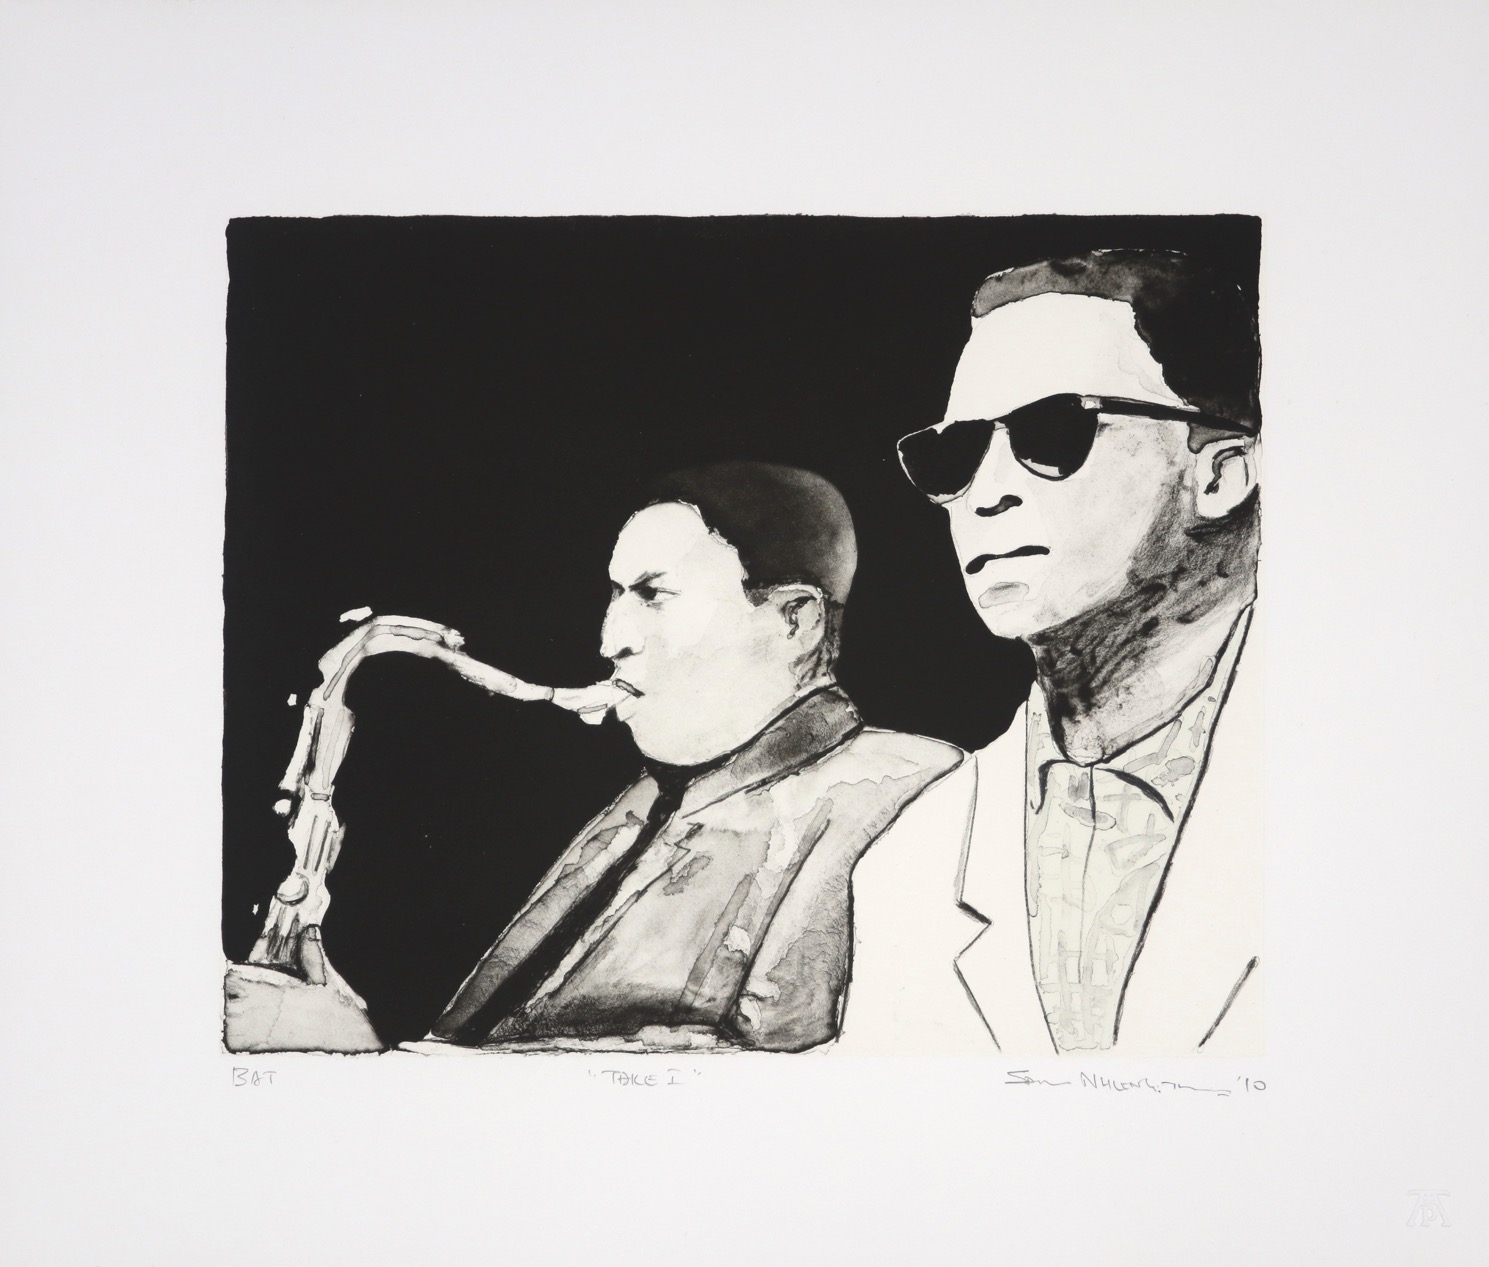 Two men's heads and shoulders facing into the frame, one playing the saxophone